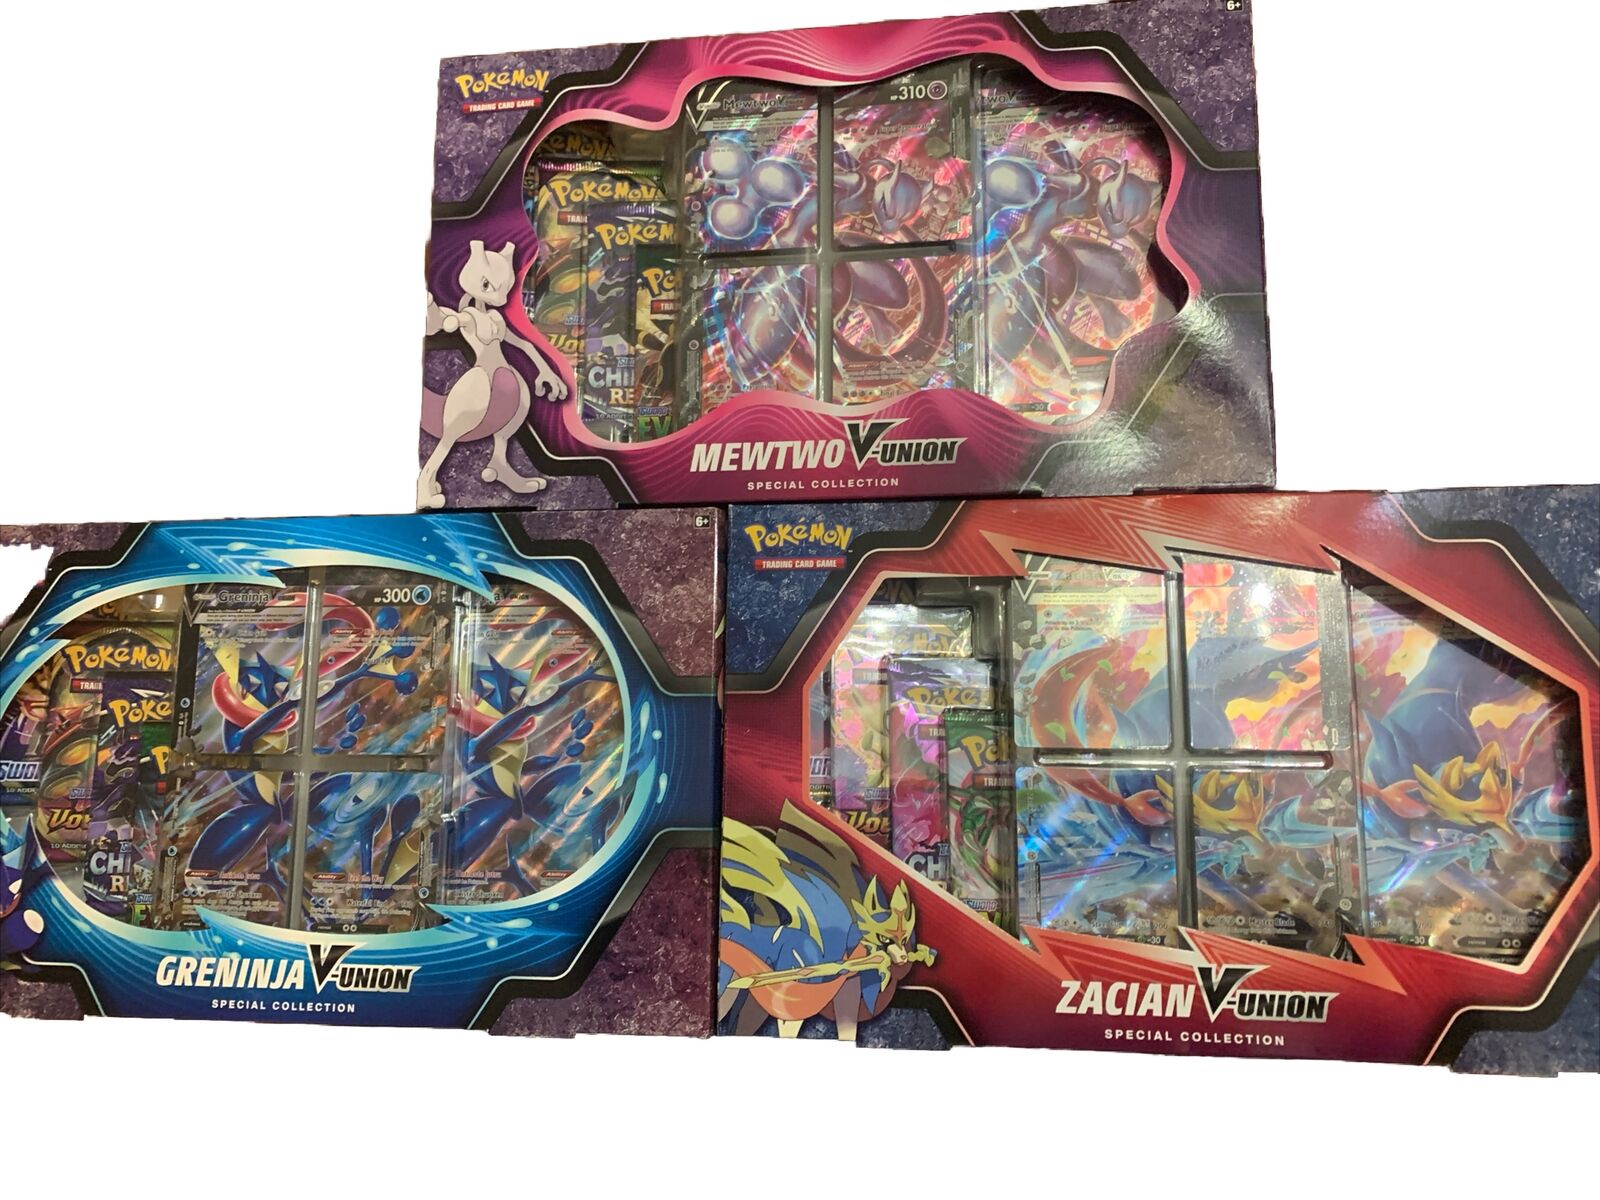 POKEMON V-Union Special Collection Set of 3 Factory Sealed BRAND NEW Mewtwo ⭐️